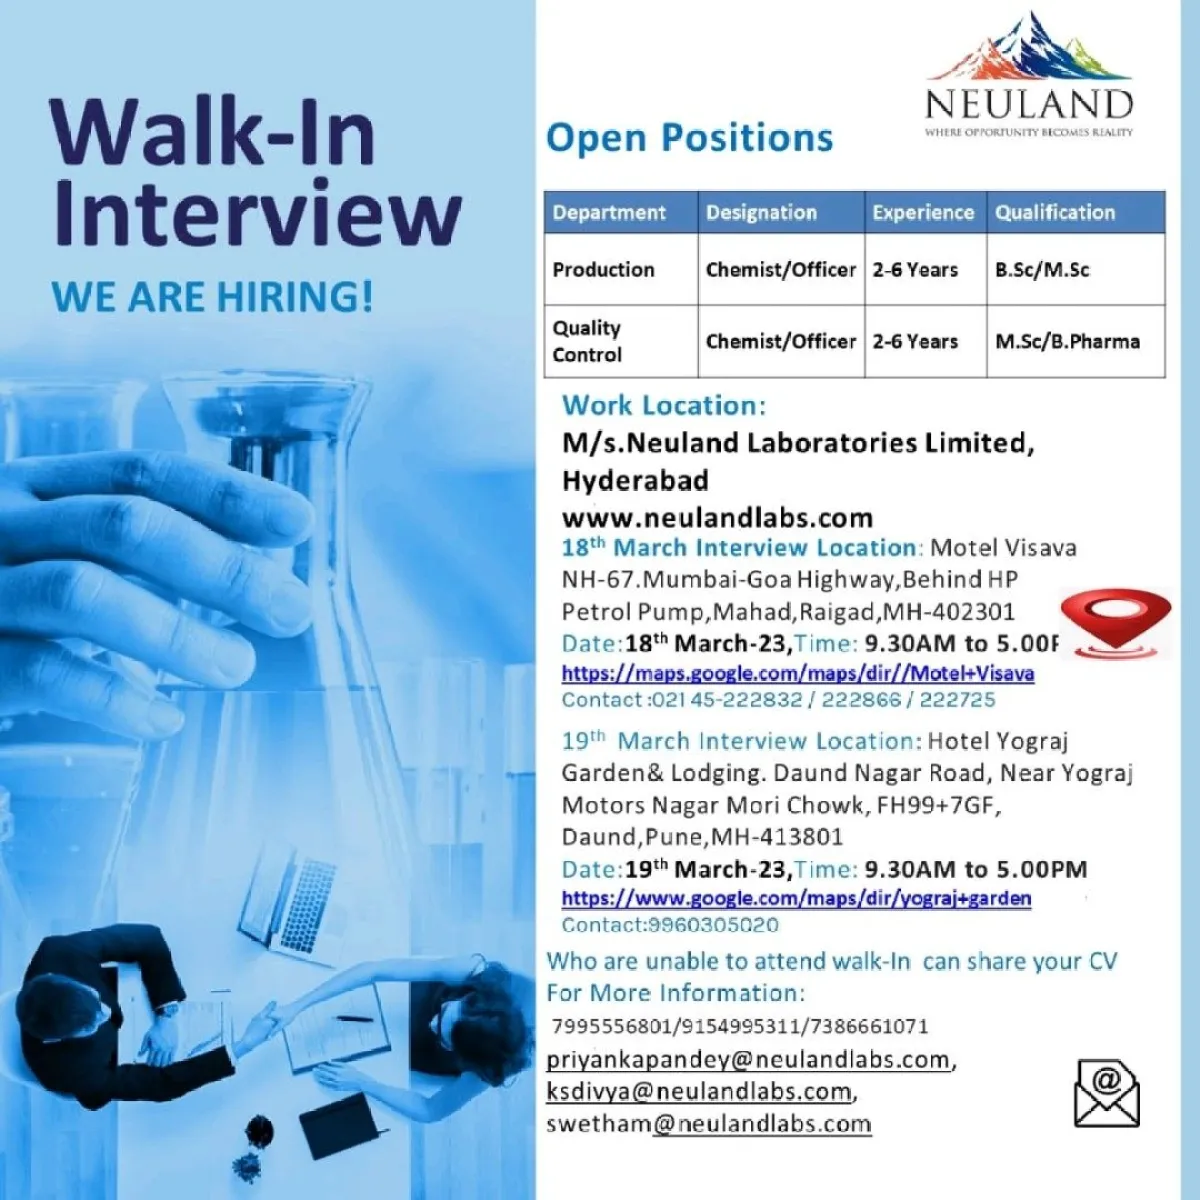 Neuland Laboratories Limited – Walk-In Interviews for Production / Quality Control